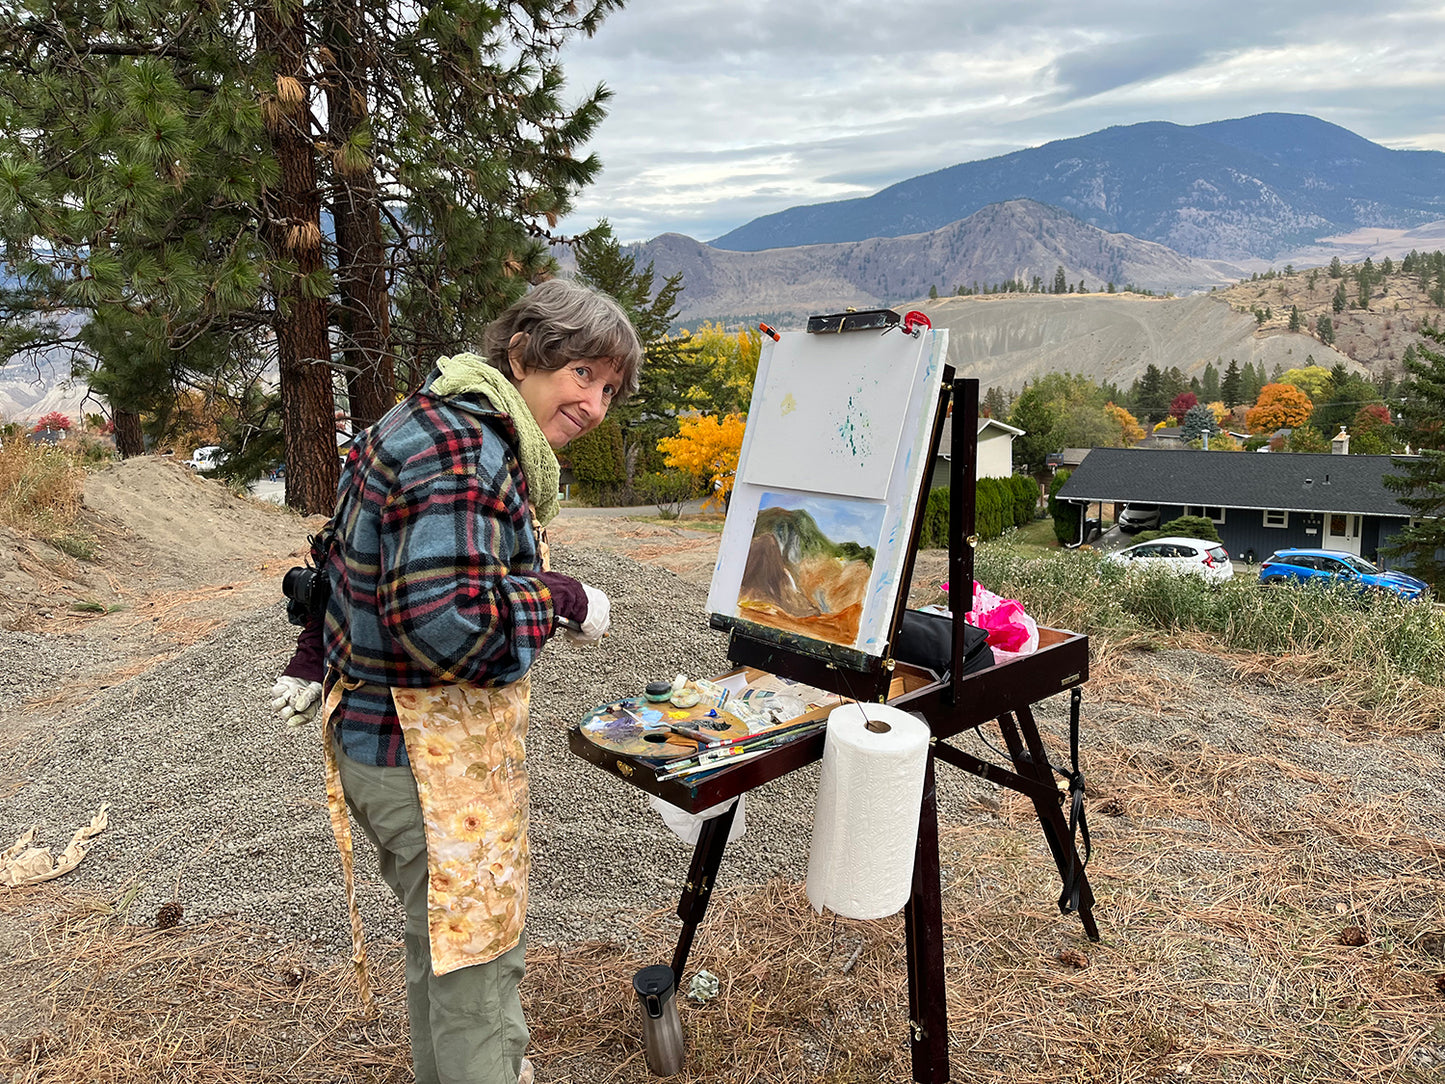 Autumn Colours Plein Air Painting Workshop (Field Guide included)